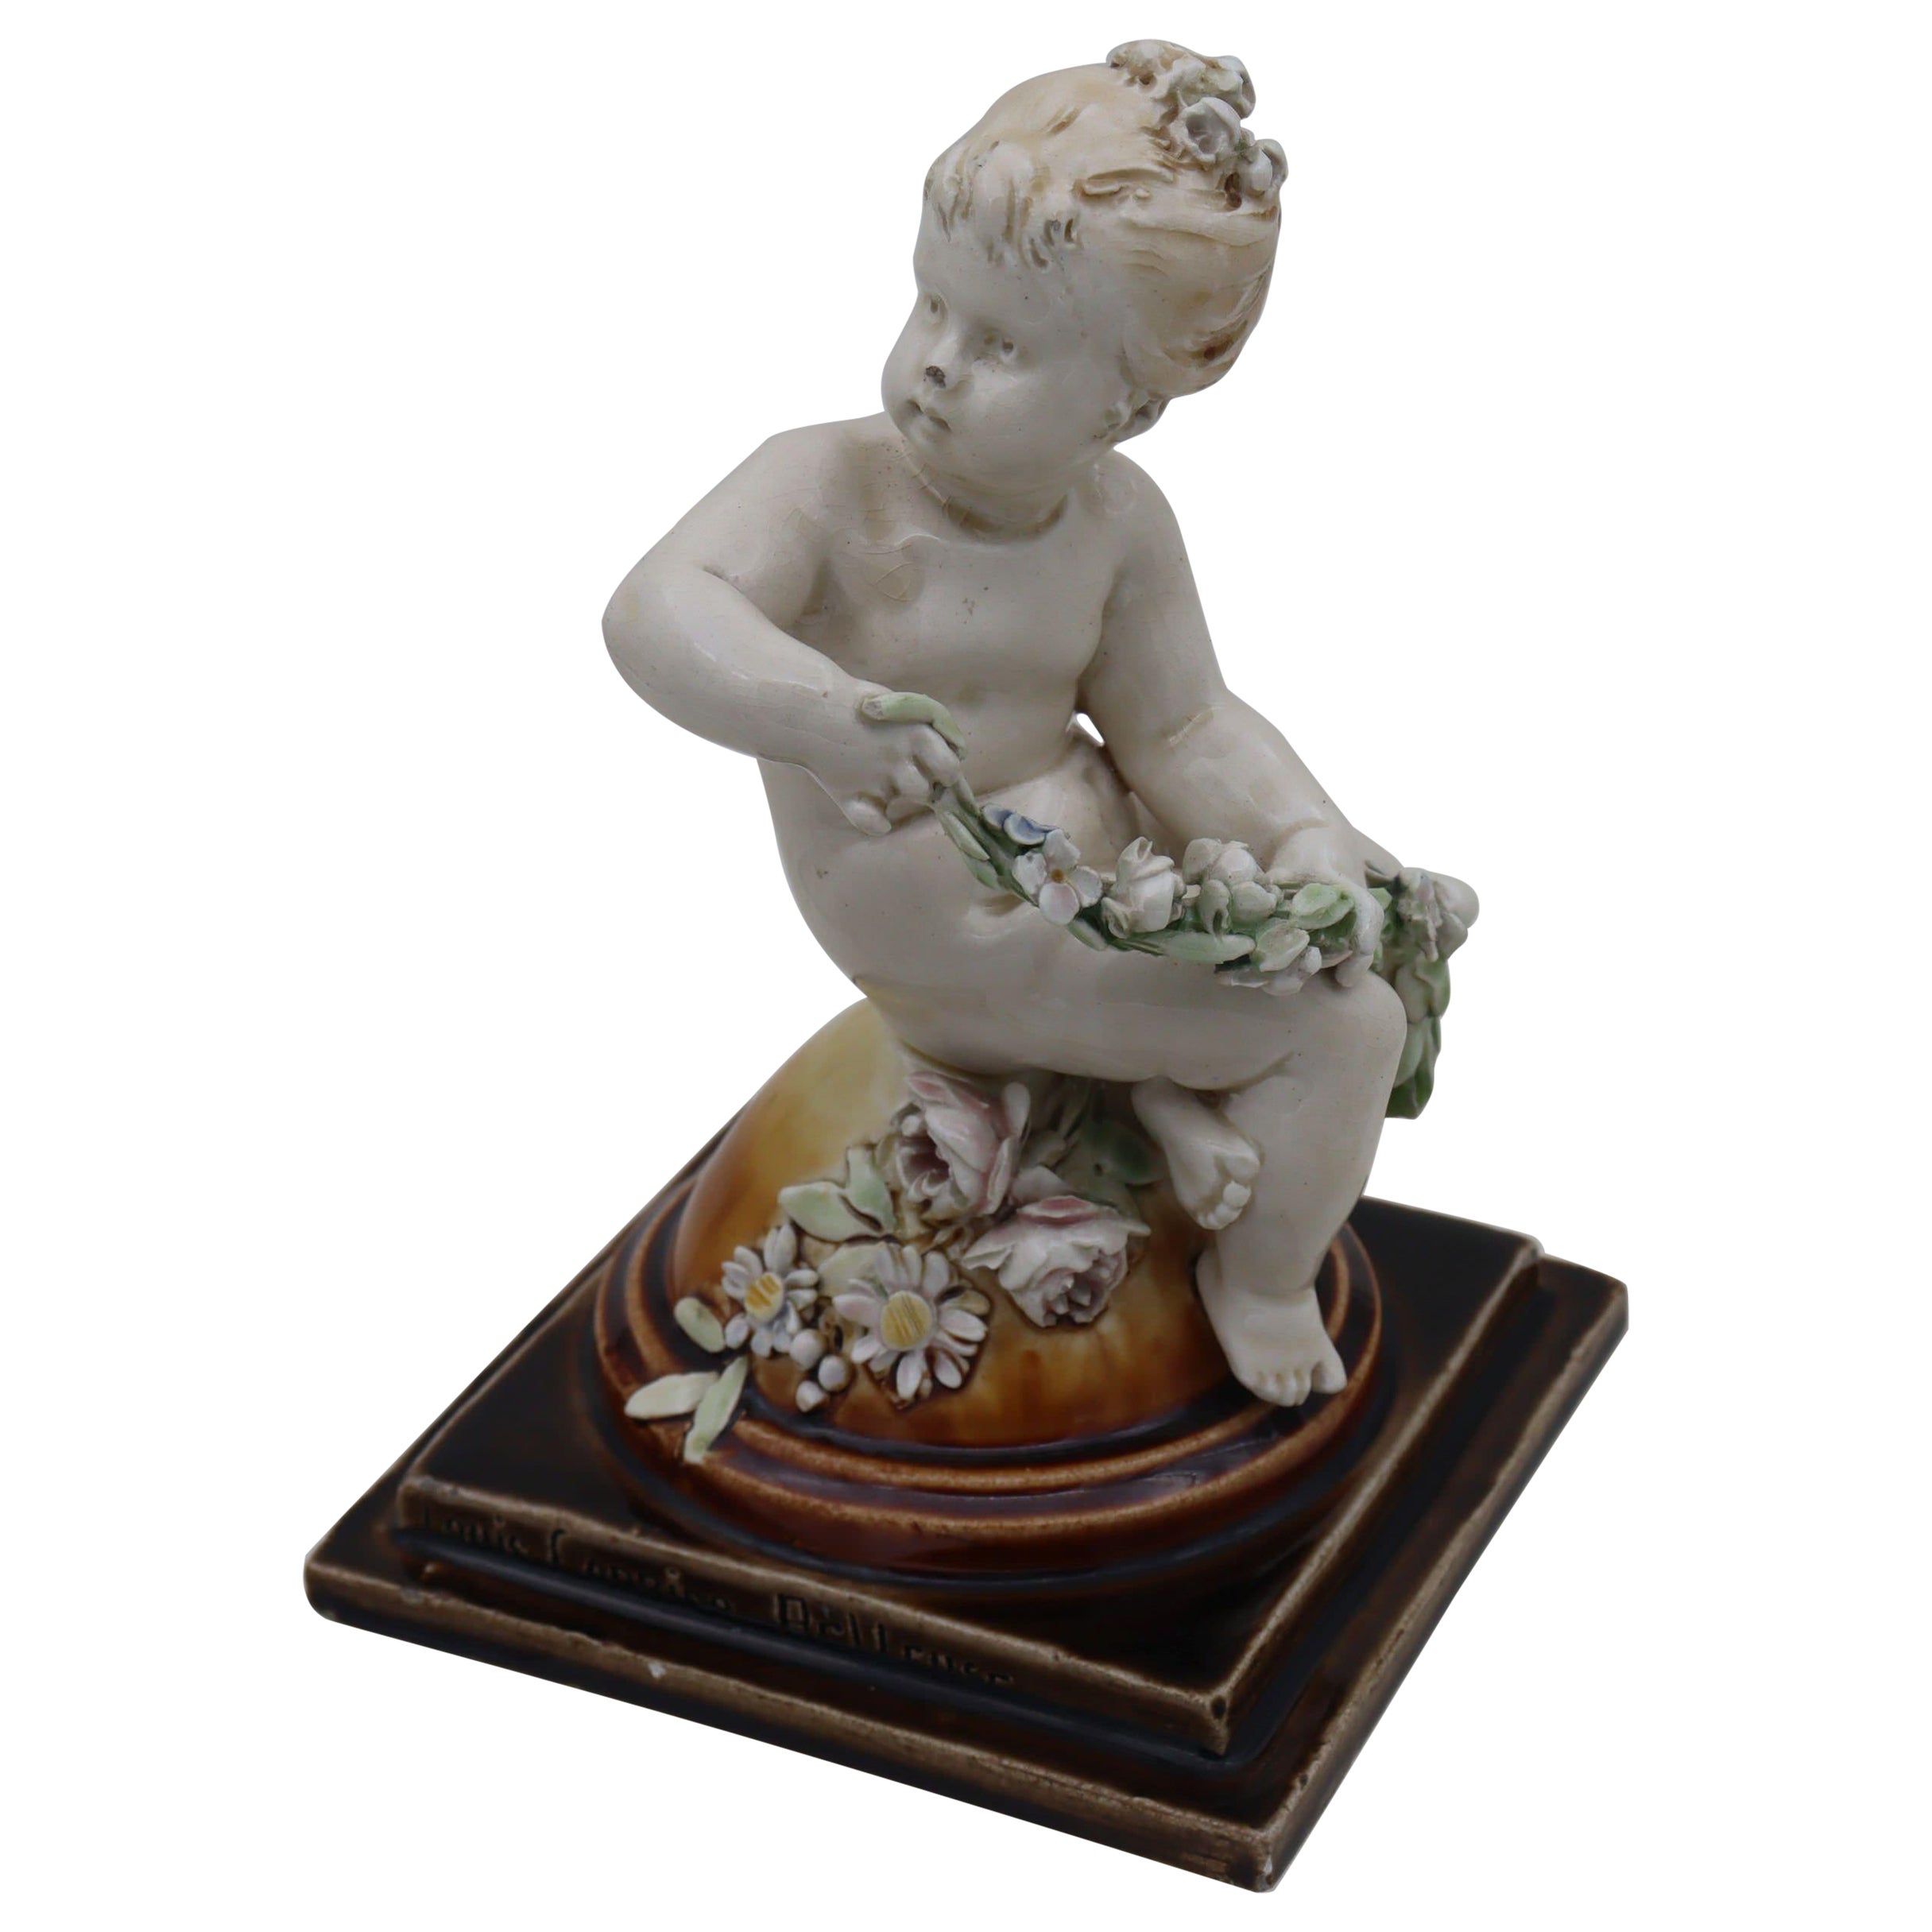 Cherub figurine by Louis Carrier-Belleuse For Sale